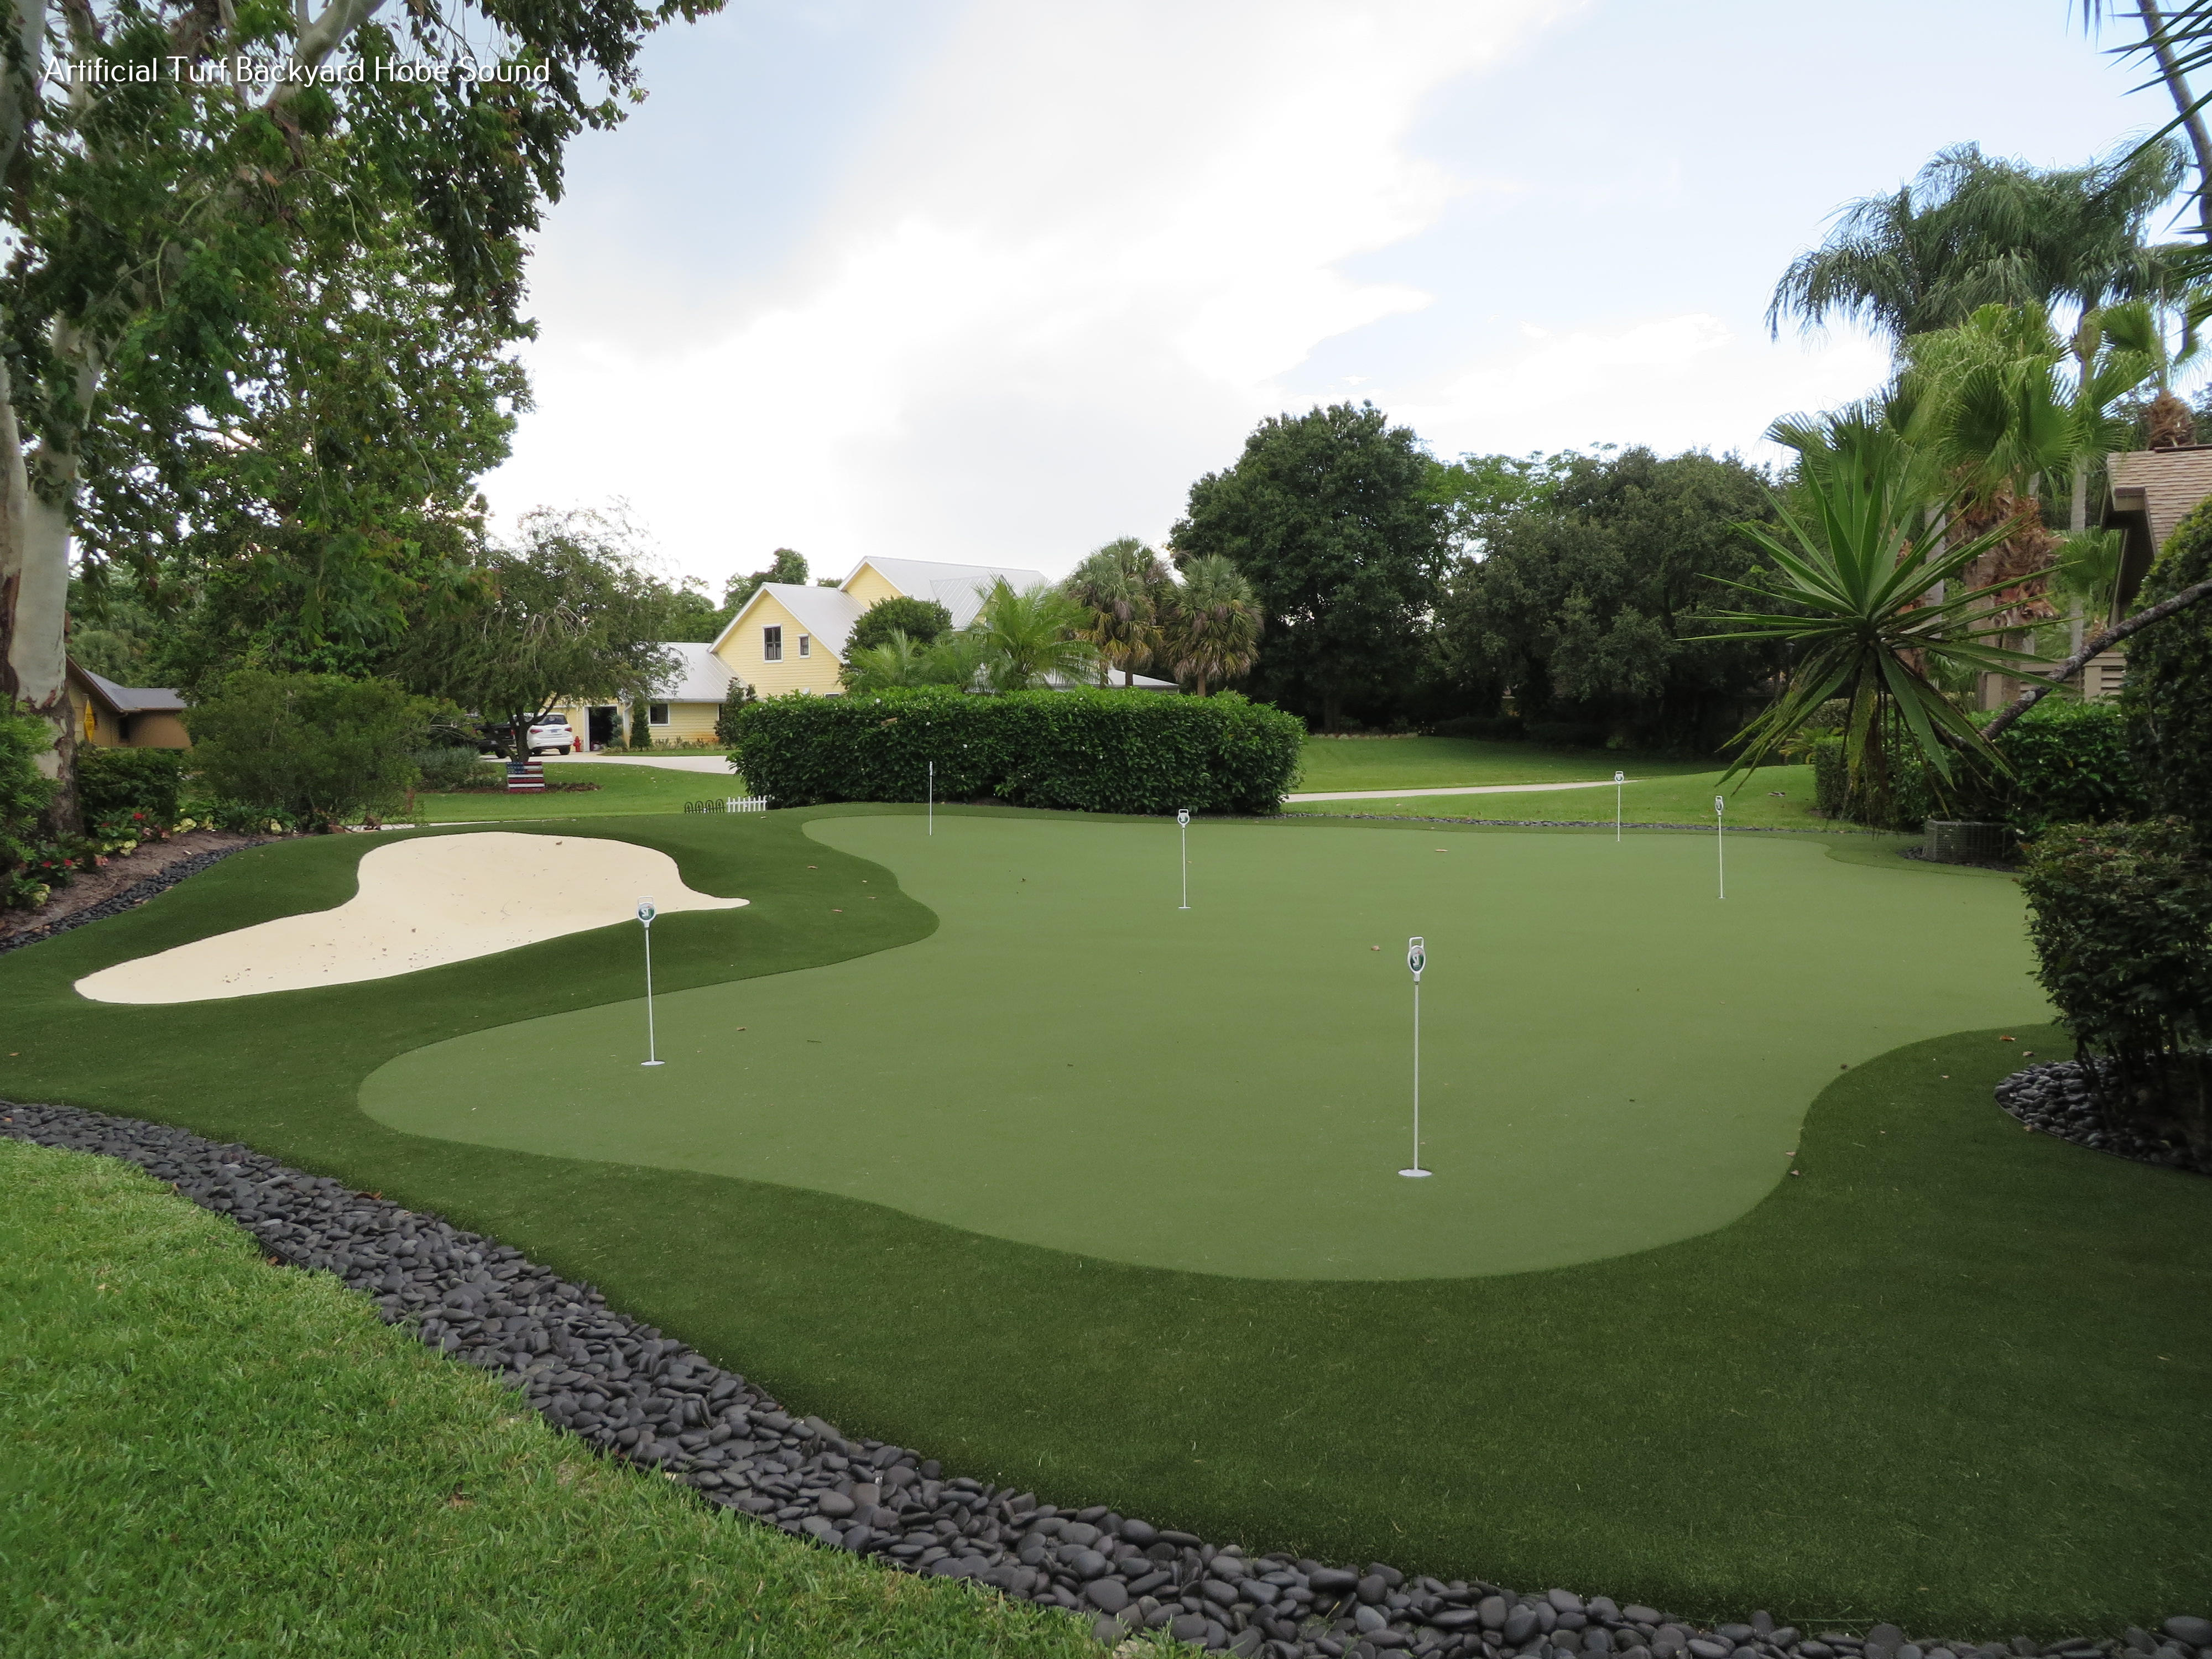 Synthetic Turf Treasure Coast Outlined the Benefits of Artificial Turf Installation 